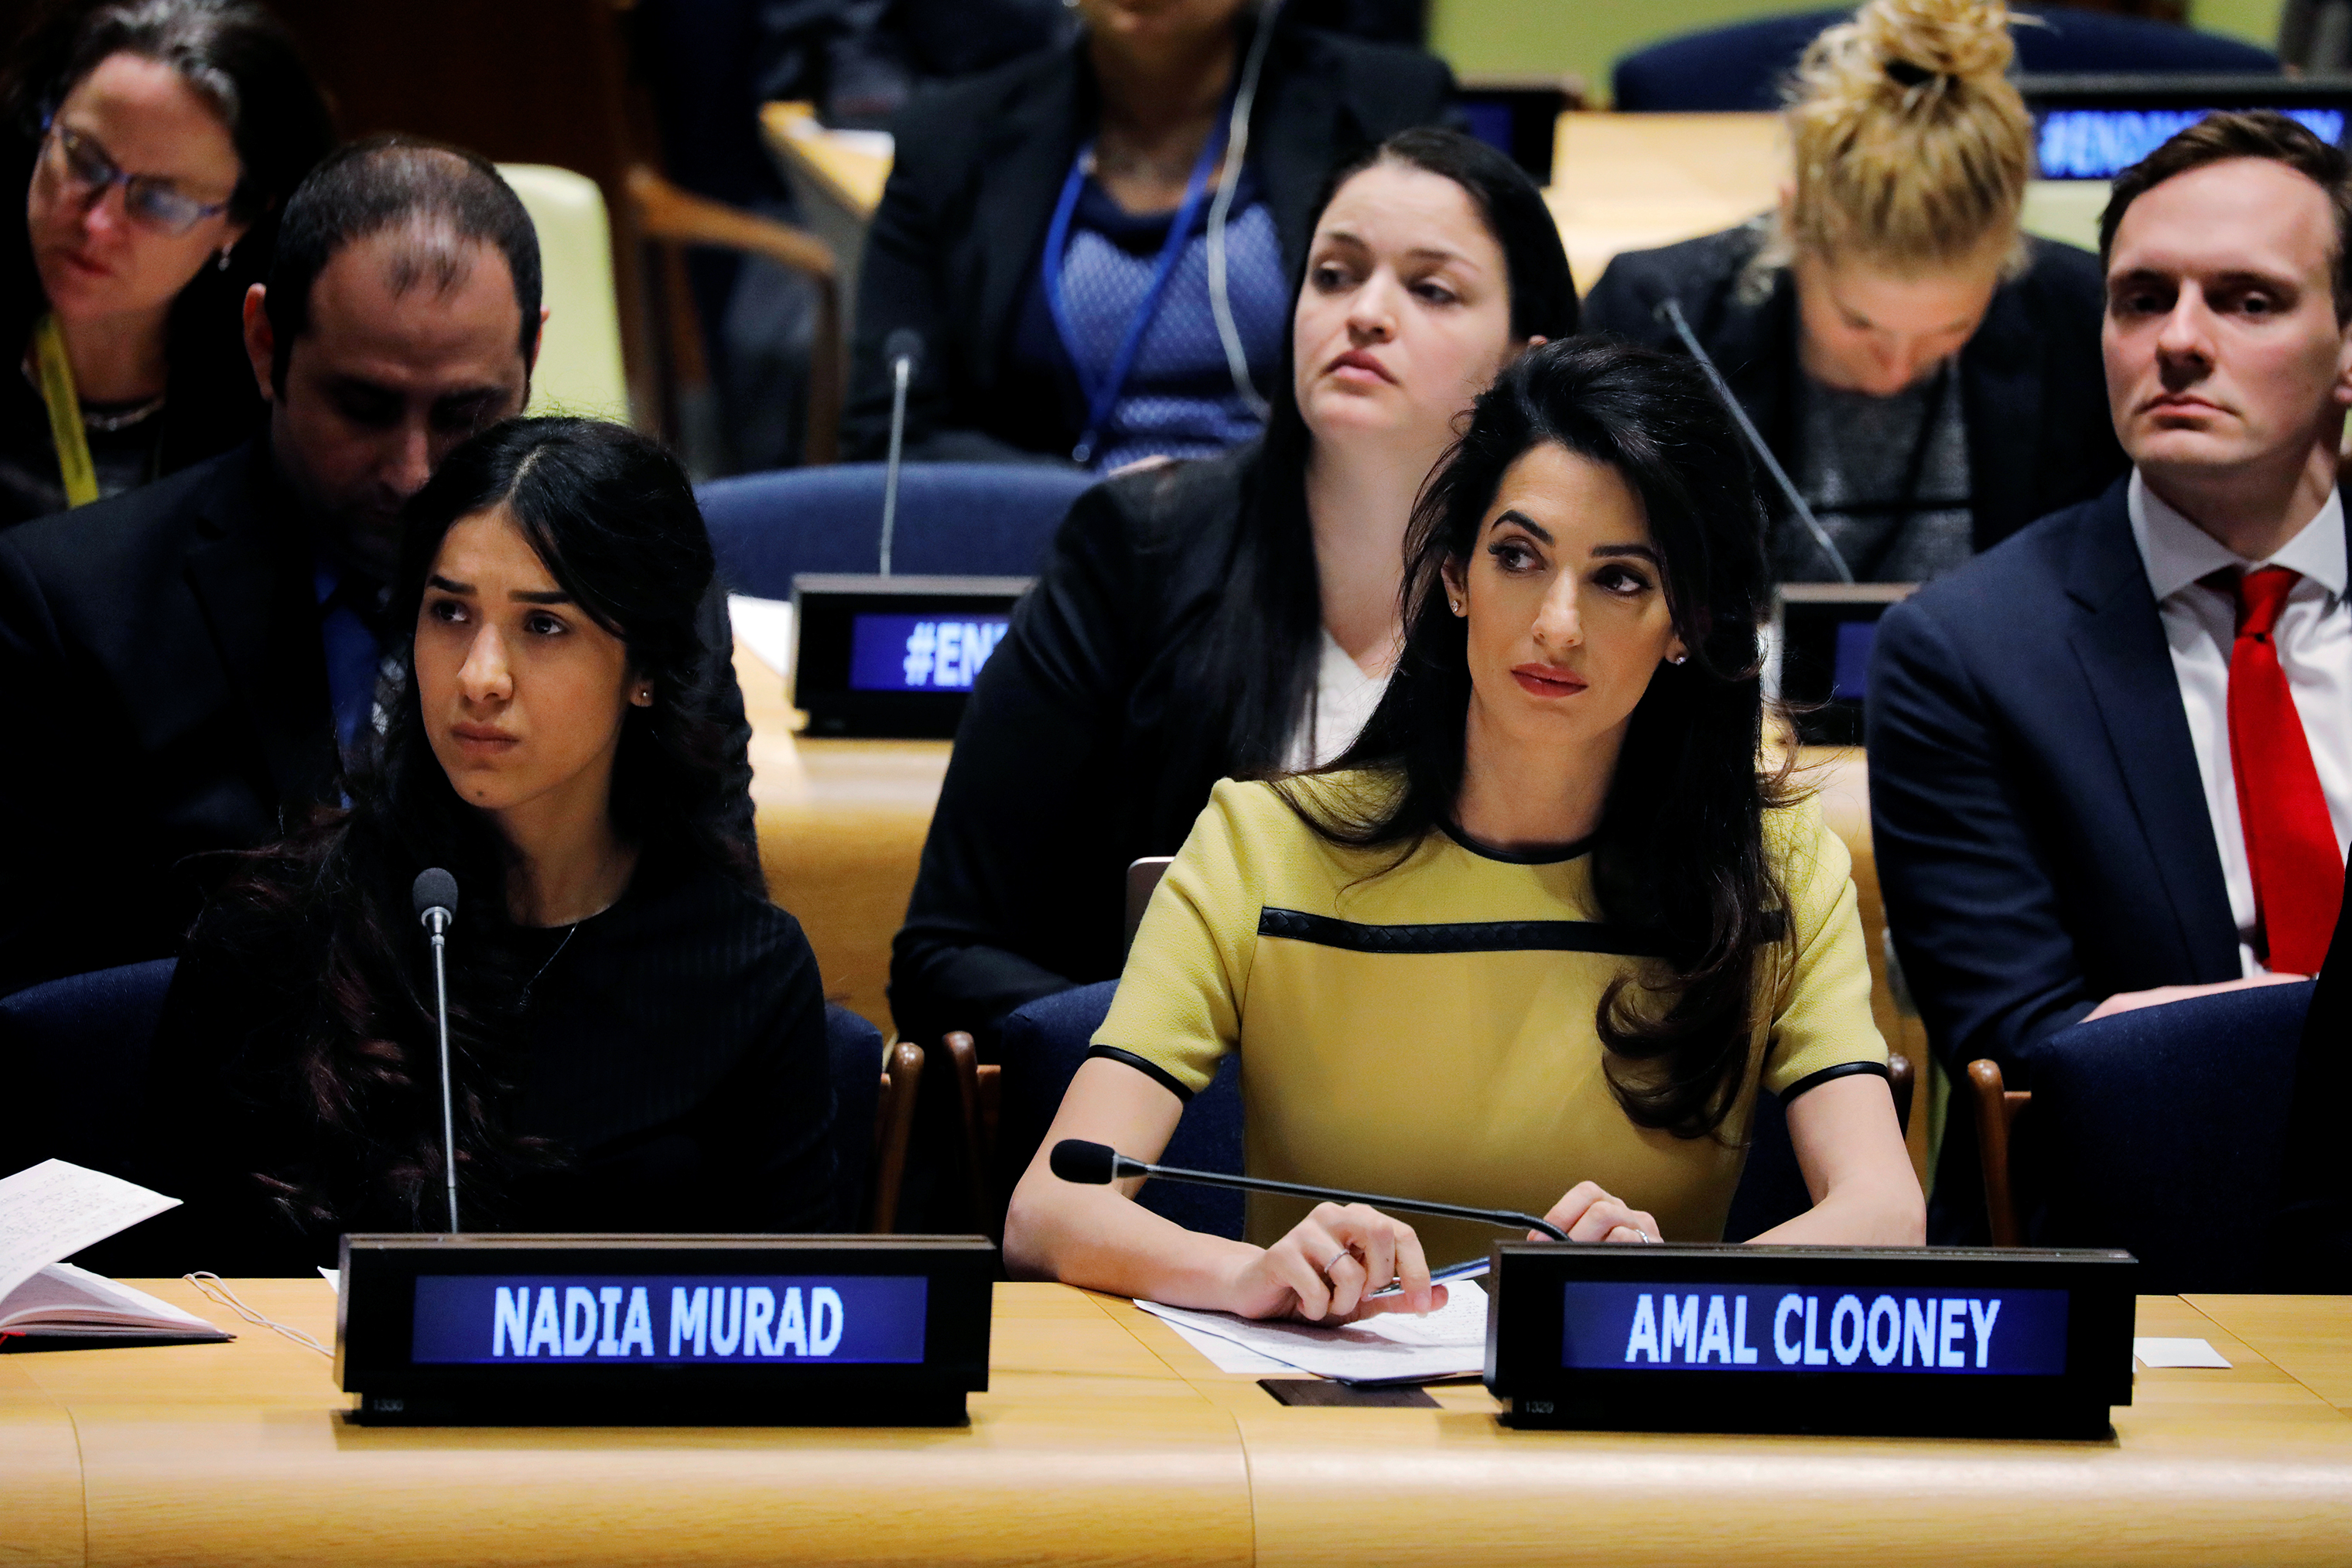 International human rights lawyer Amal Clooney sits with Murad as she waits to address a "Bringing Da'esh to Justice" event at the United Nations headquarters in New York on March 9, 2017. (Lucas Jackson—Reuters)